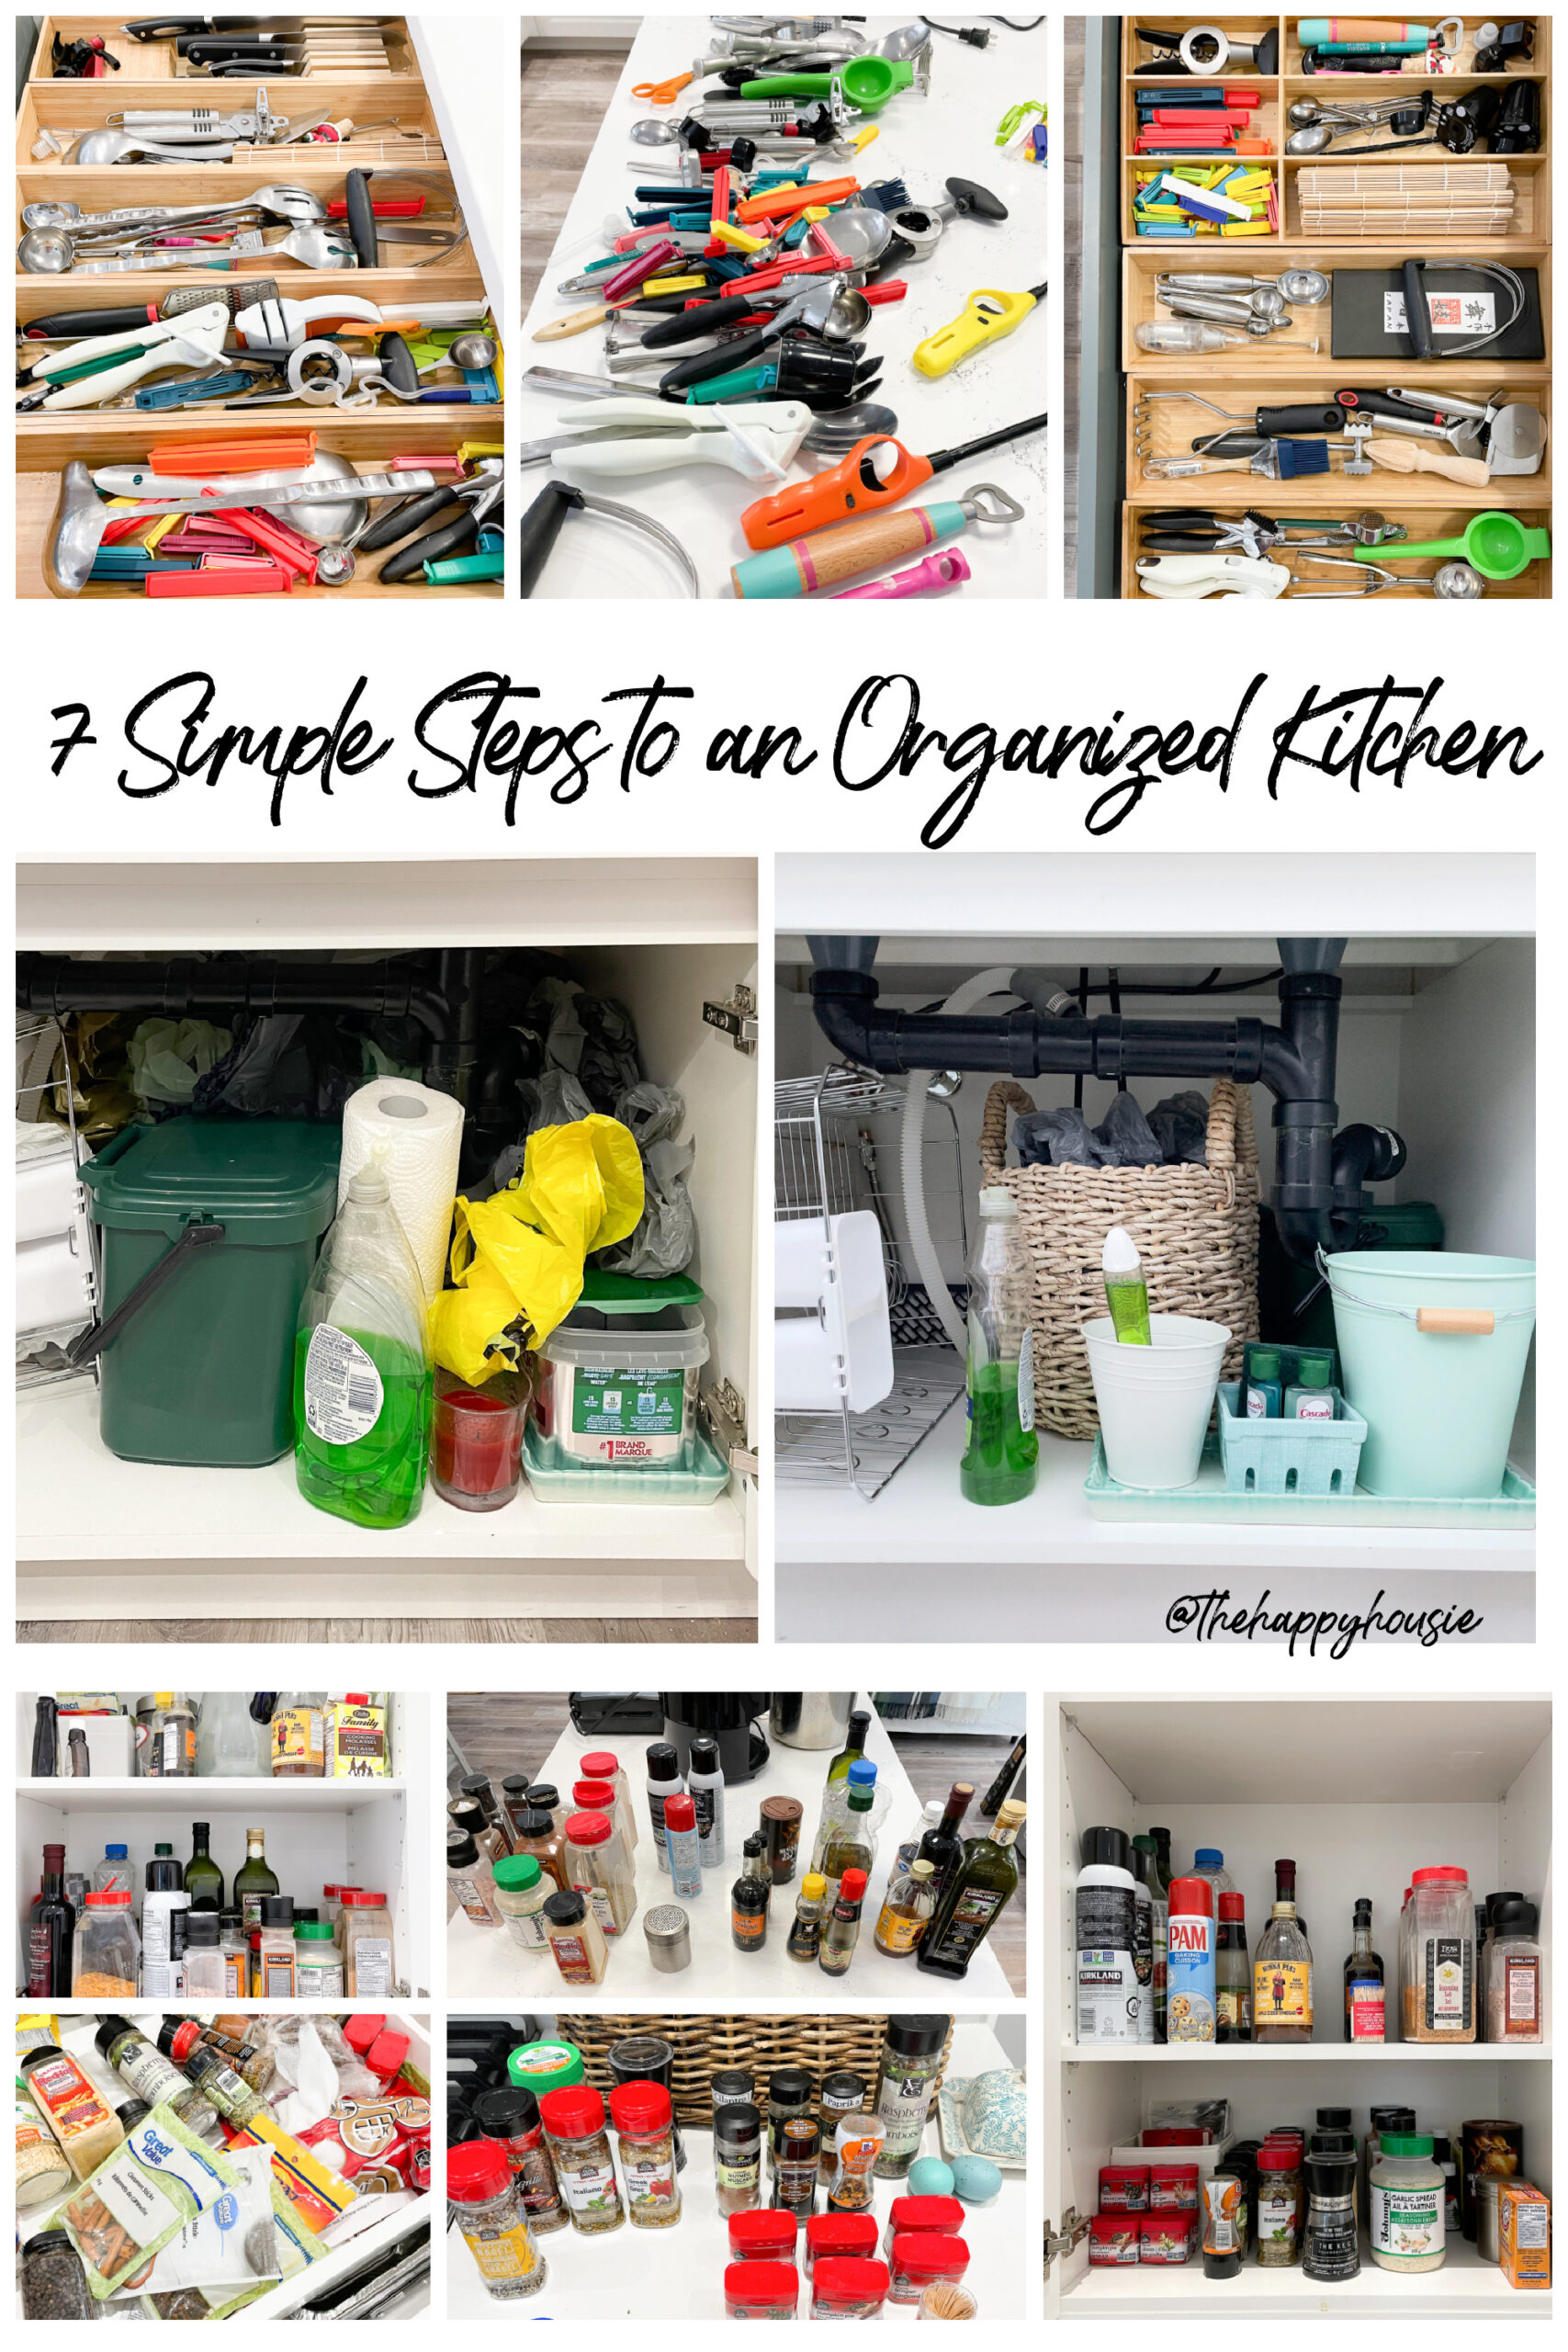 https://www.thehappyhousie.com/wp-content/uploads/2022/01/7-steps-to-completely-organize-your-kitchen-scaled.jpg